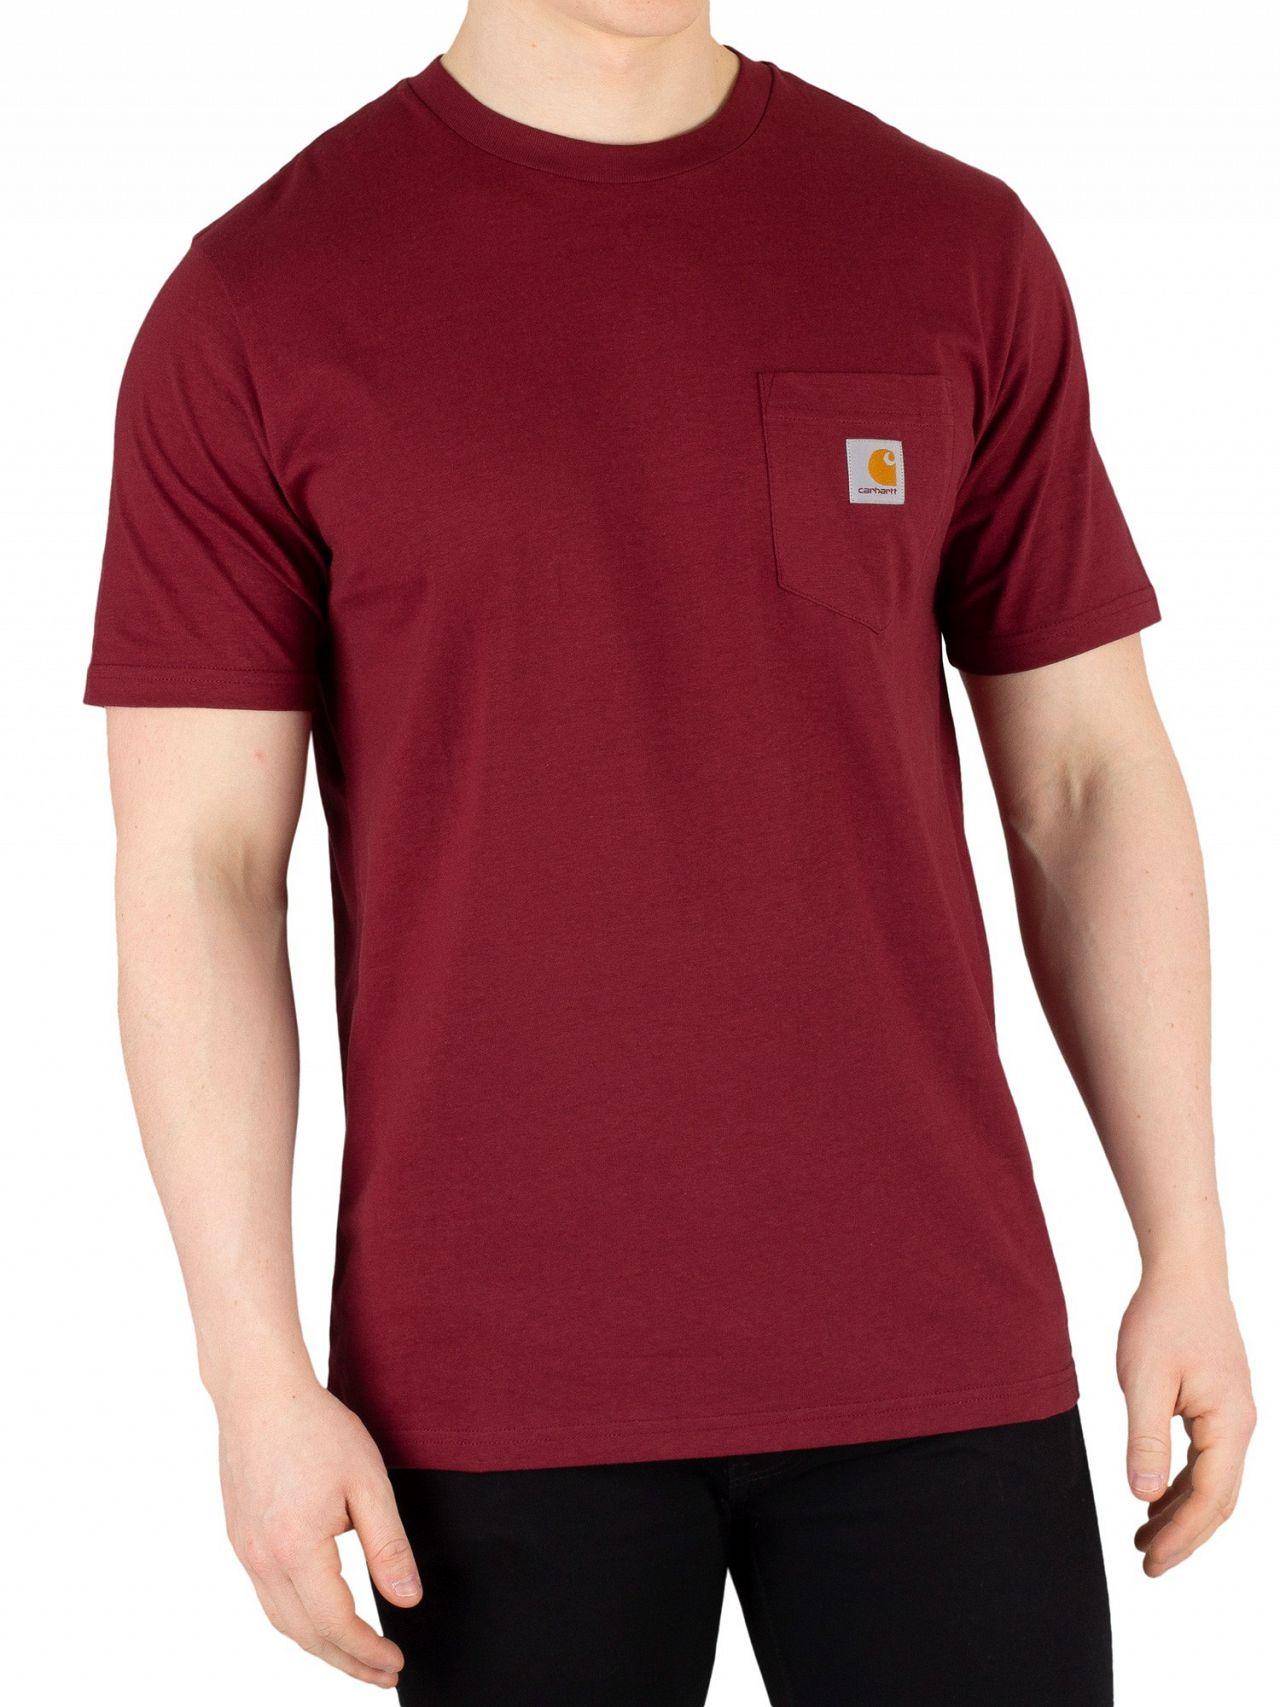 Carhartt WIP Cranberry Pocket T-shirt in Red for Men - Lyst